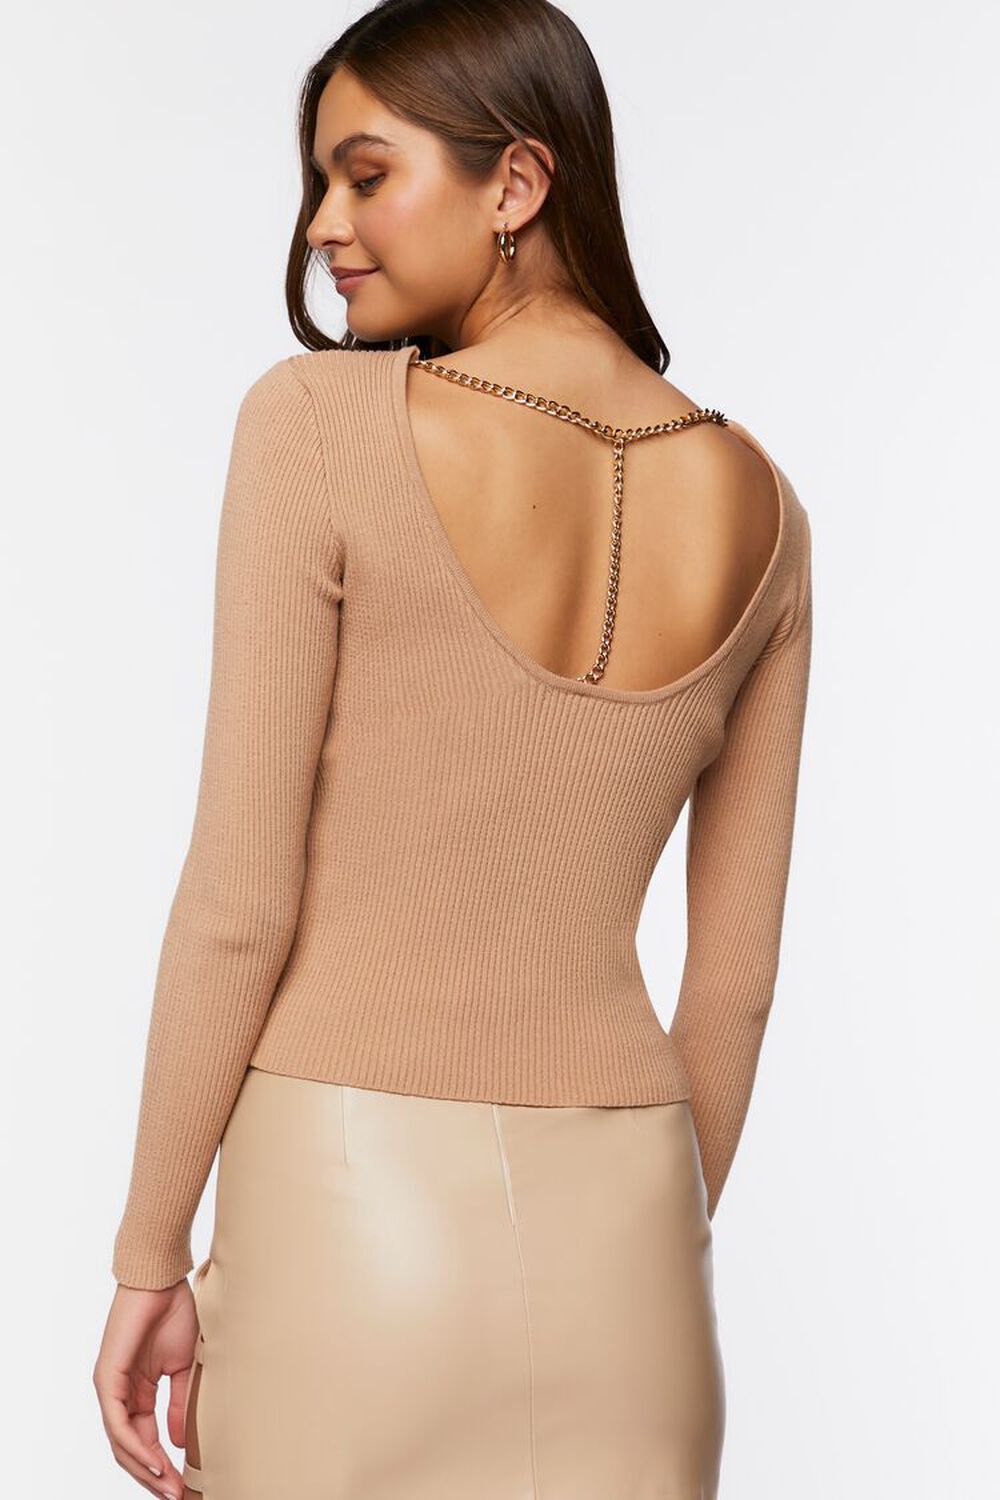 BEIGE Chain Back Sweater-Knit Top, image 3